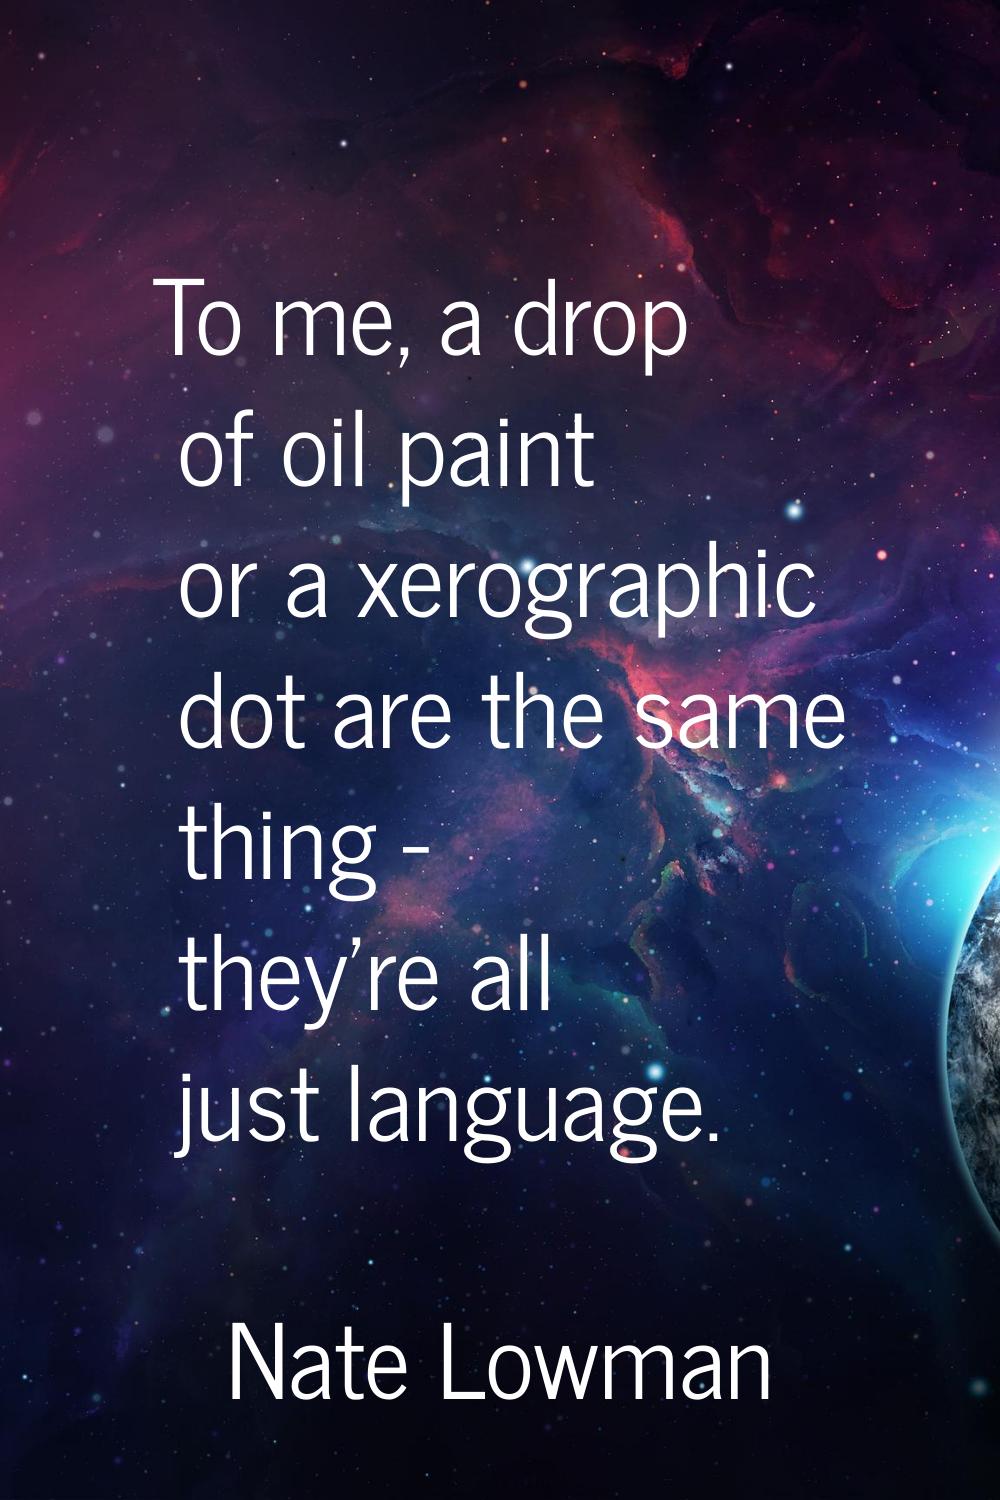 To me, a drop of oil paint or a xerographic dot are the same thing - they're all just language.